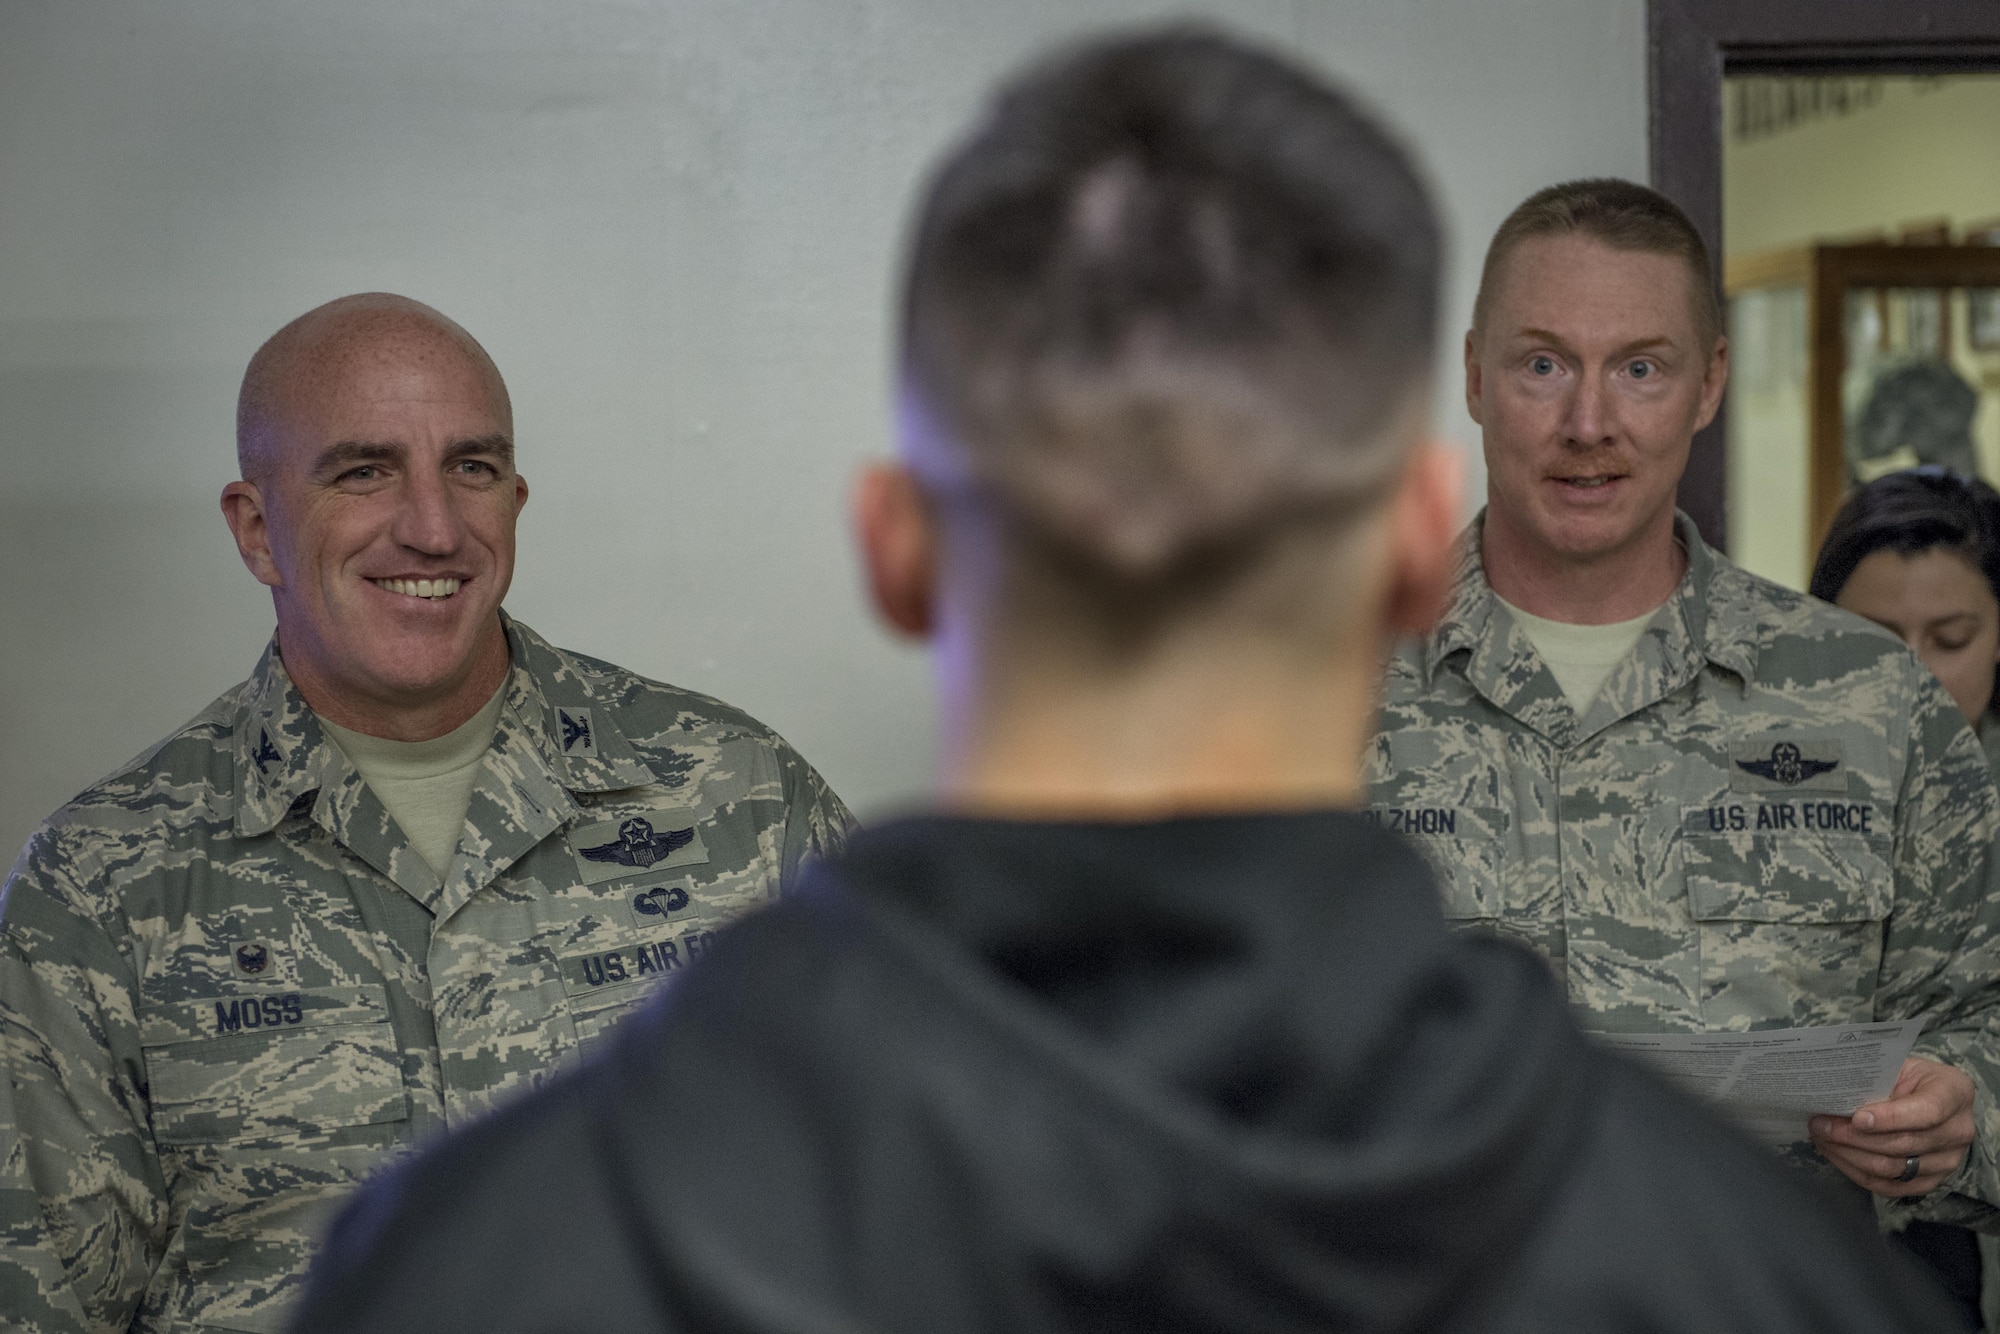 Col. Kenneth Moss, 374th Airlift Wing commander, and Chief Master Sgt. Michael L. Molzhon, 374th Operations Group superintendent, listen to a brief prior to being tased during a 374th Security Forces Squadron less-lethal weapons demonstration March 15, 2017, at Yokota Air Base, Japan. Moss volunteered to be part of the demonstration to experience and understand more of what SFS members go through and to show his support. (U.S. Air Force photo by Airman 1st Class Donald Hudson)